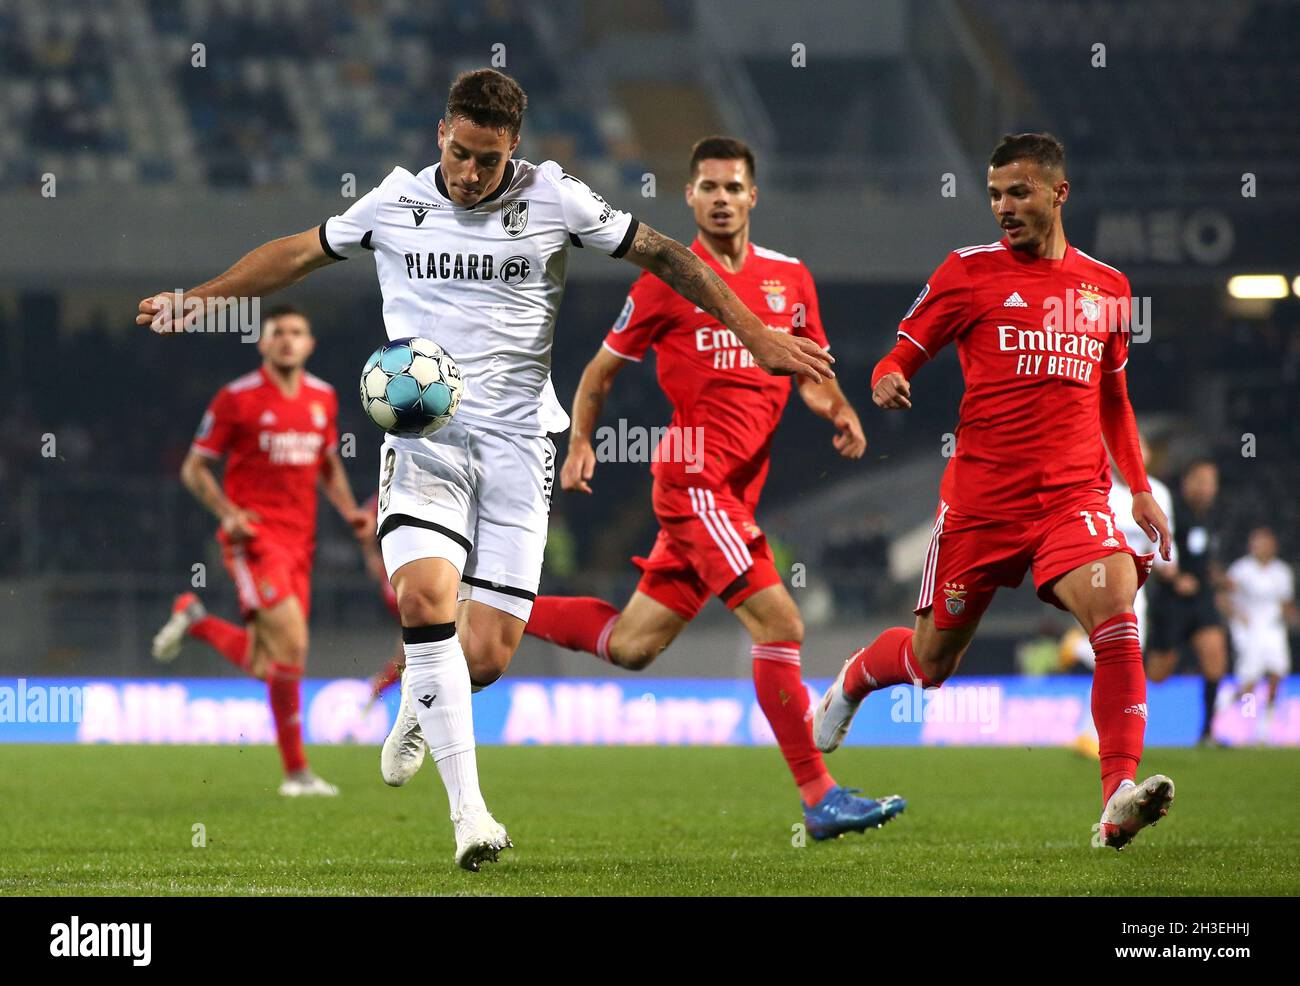 GUIMARAES, PORTUGAL - OCTOBER 27: Bruno Duarte of Vitoria Sc competes for the ball with Diogo Goncalves of Benfica SL ,during the Portugal Allianz Cup match between Vitoria SC and Benfica SL at Estadio Dom Afonso Henriques on October 27, 2021 in Guimaraes, Portugal. (Photo by MB Media) Stock Photo